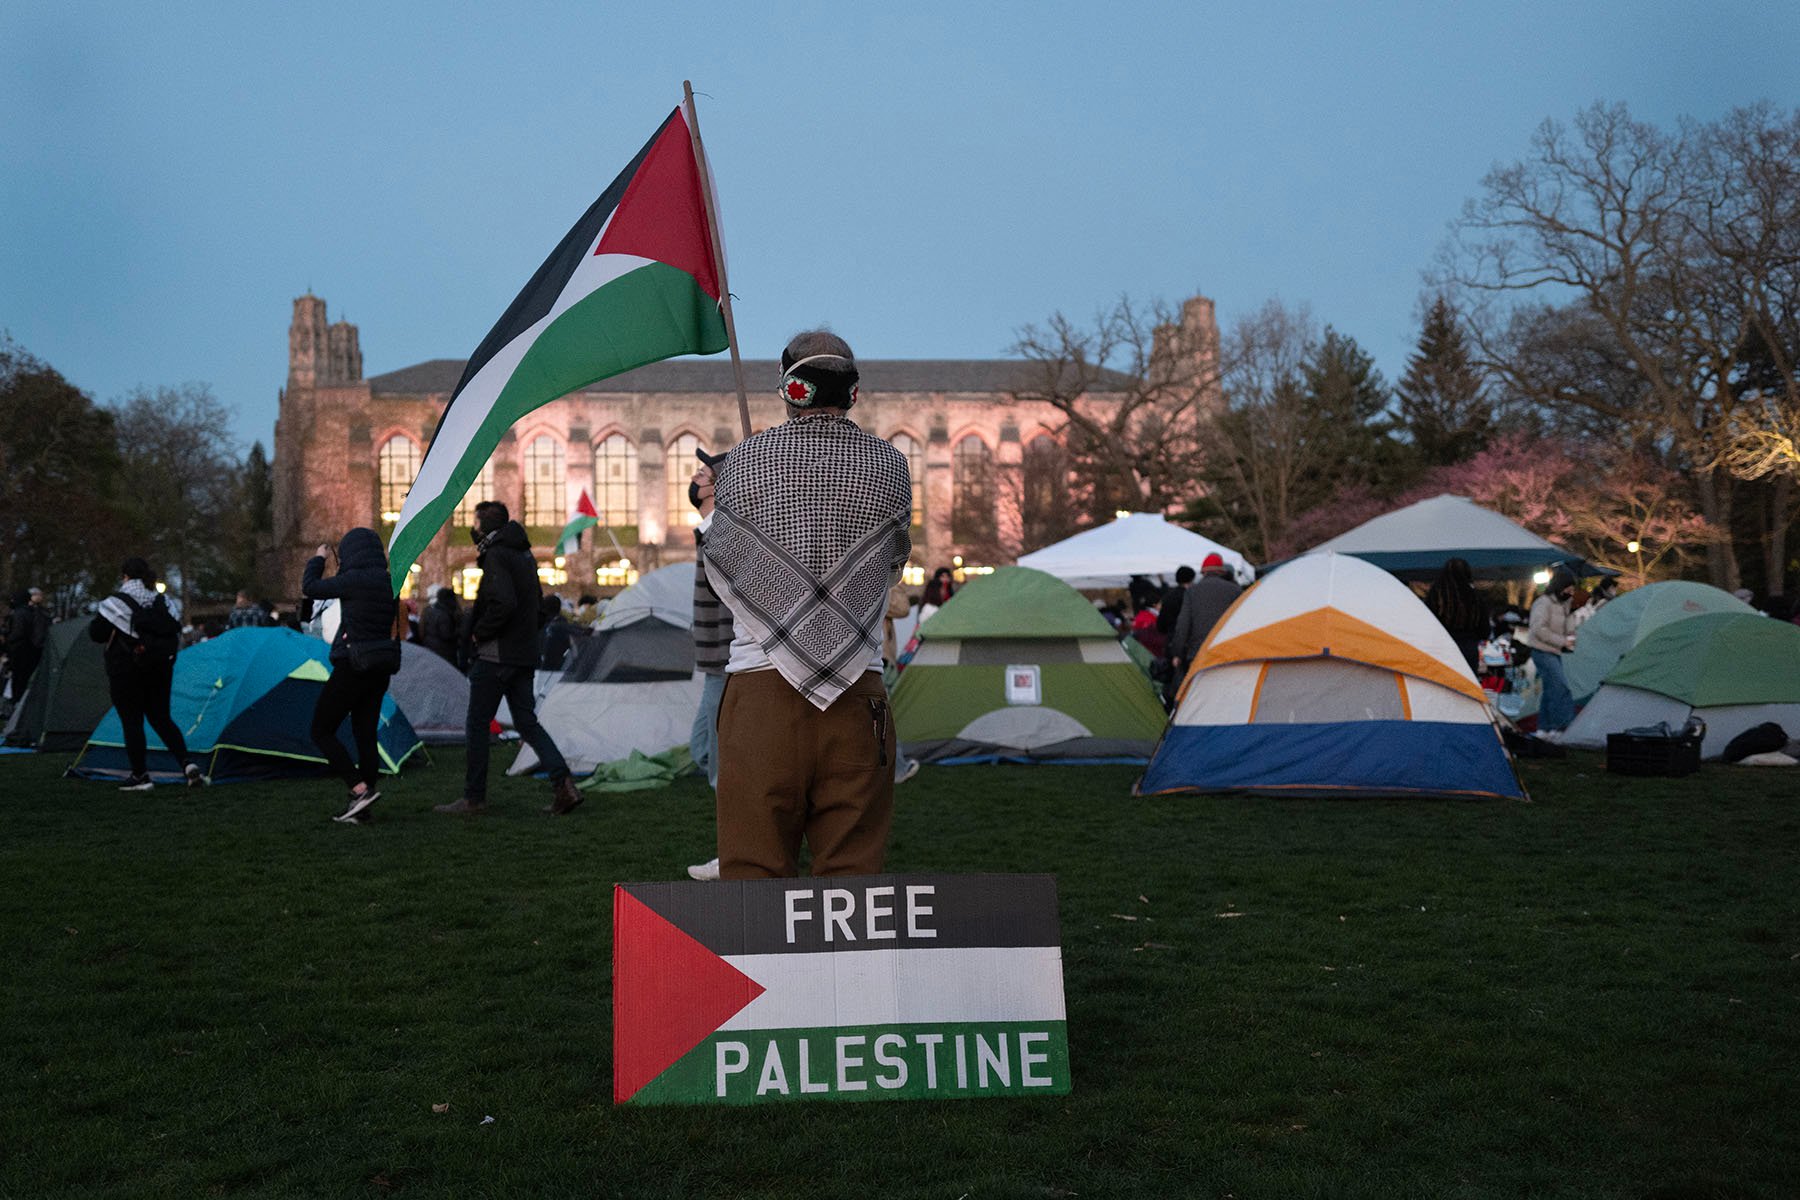 A man is seen wearing a keffiyeh and waving a Palestinian flag as people rally at the pro-Palestinian encampment on the campus of Northwestern University.